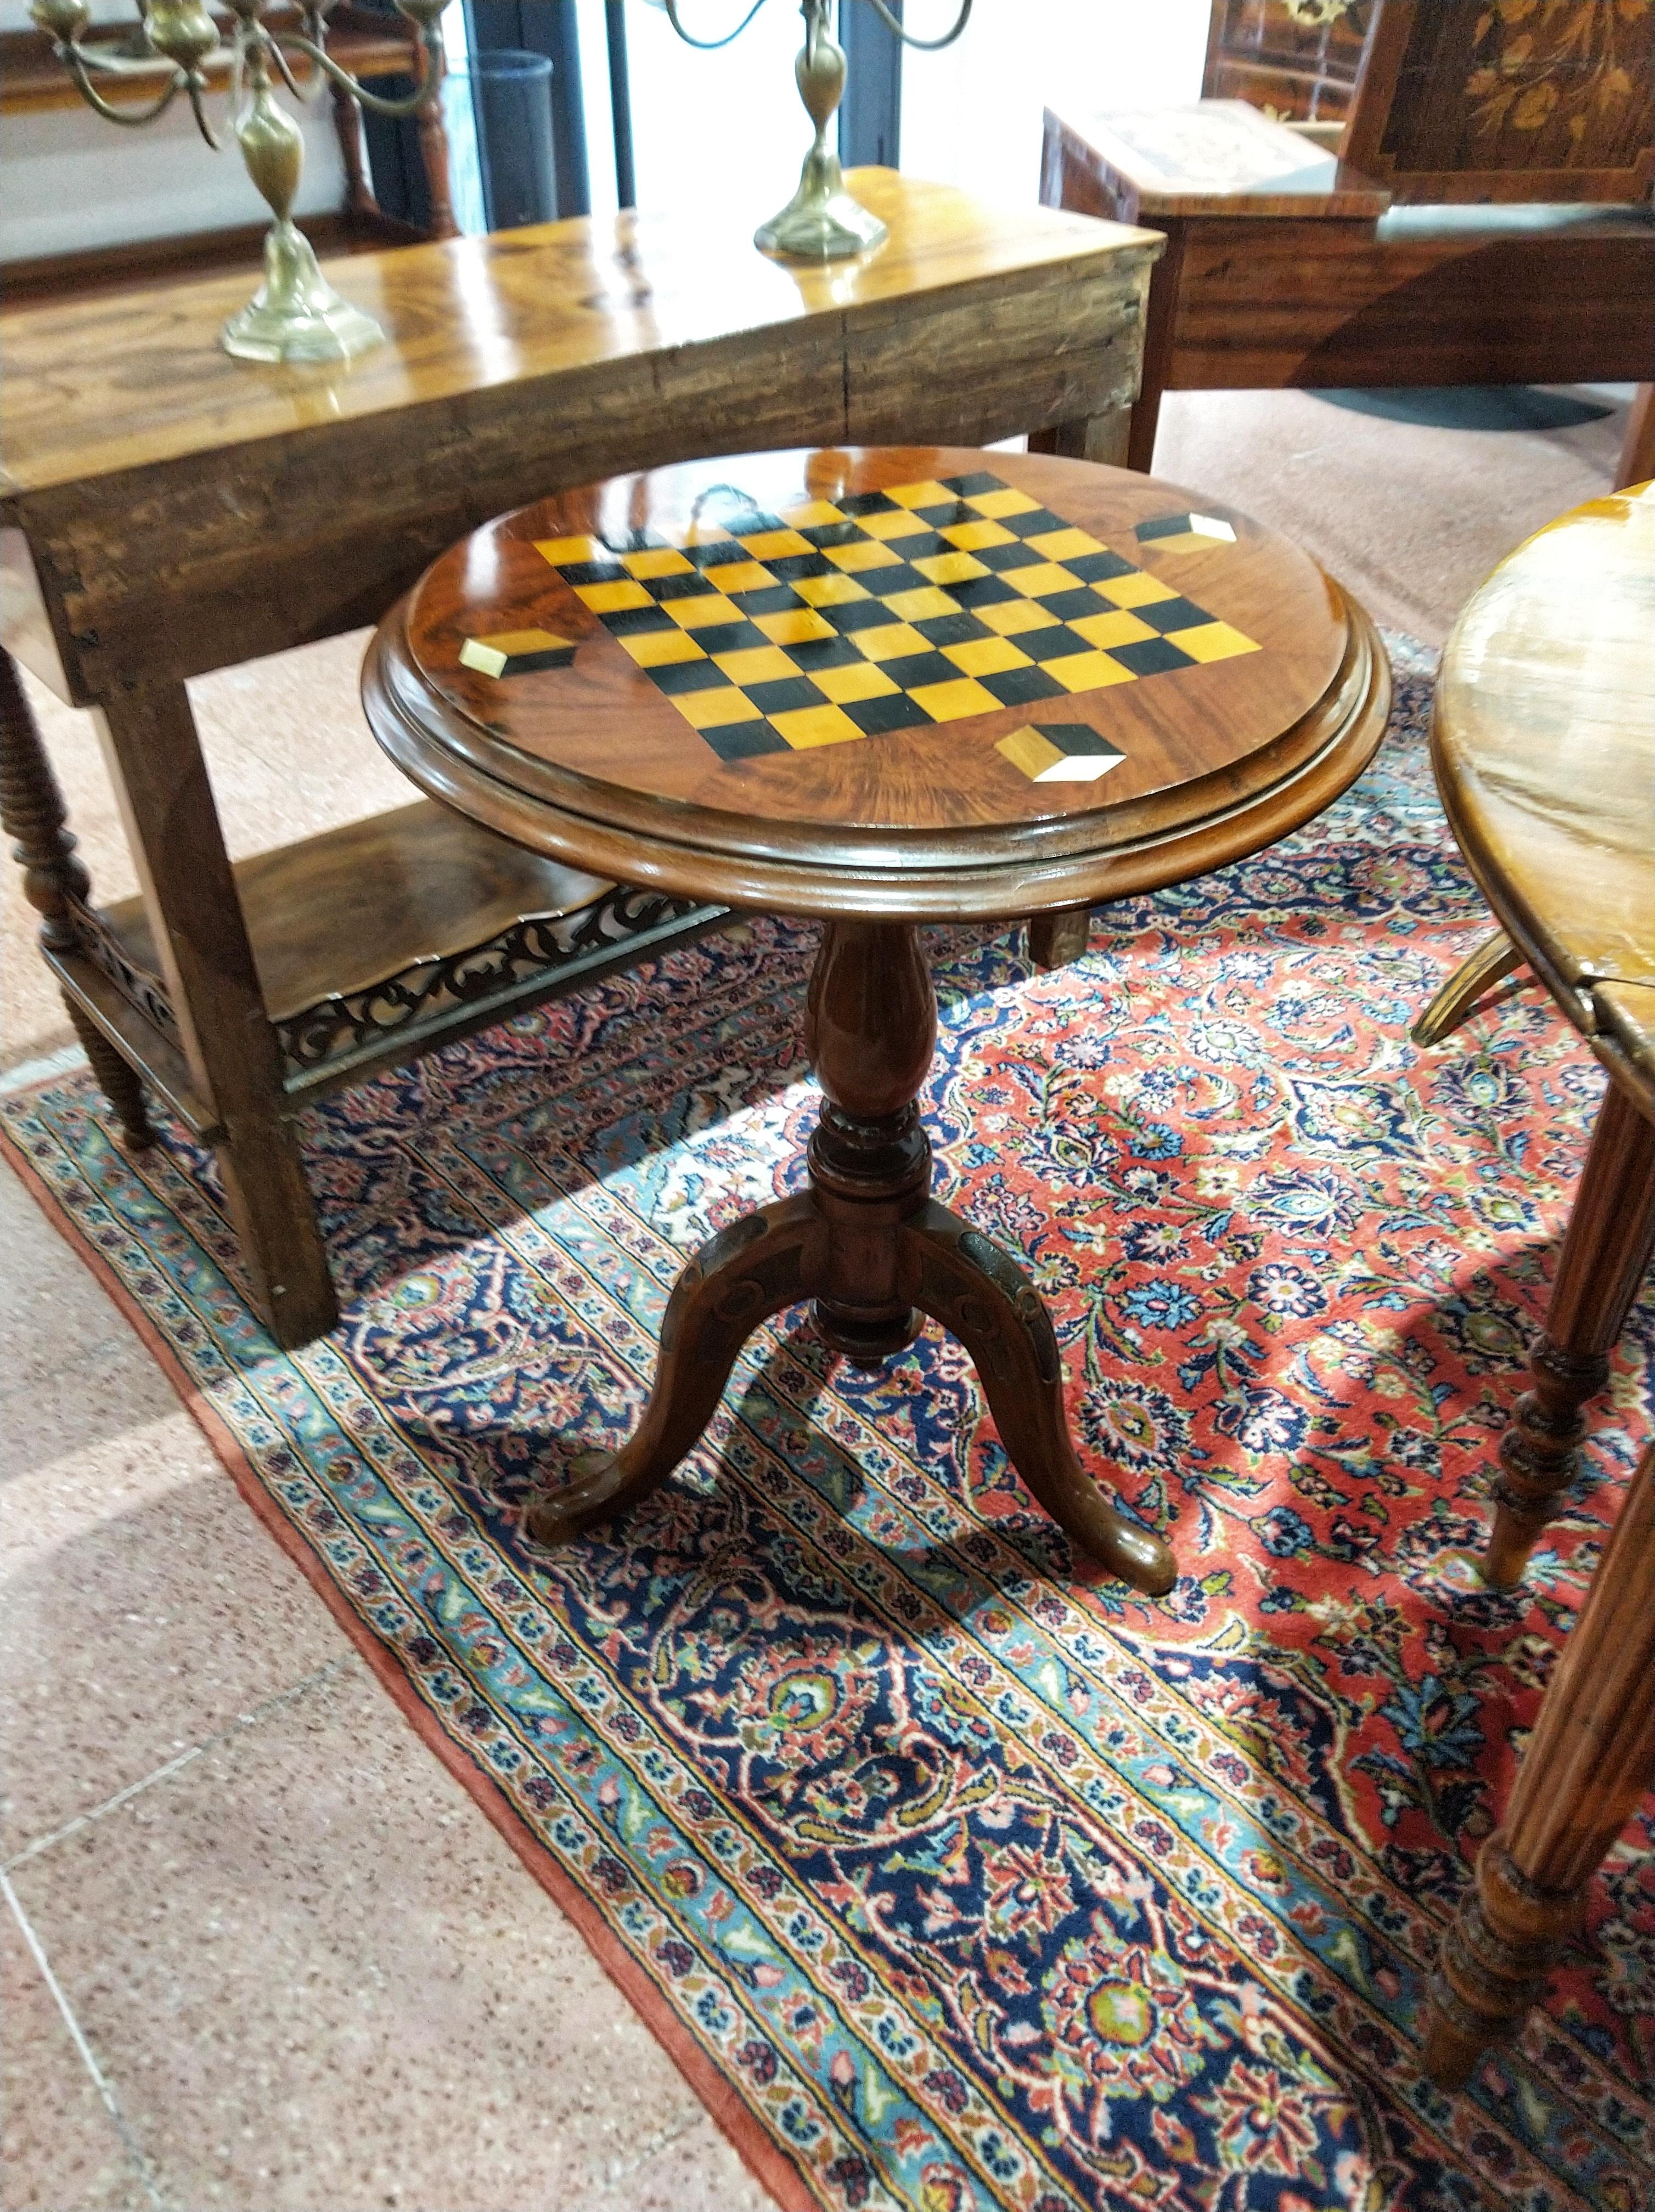 Mid-19th century Napoleon III Italian game table, flame mahogany, inlaid, restored.

Elegant Italian table inlaid with chessboard, with a torned central leg supported by shaped feet.